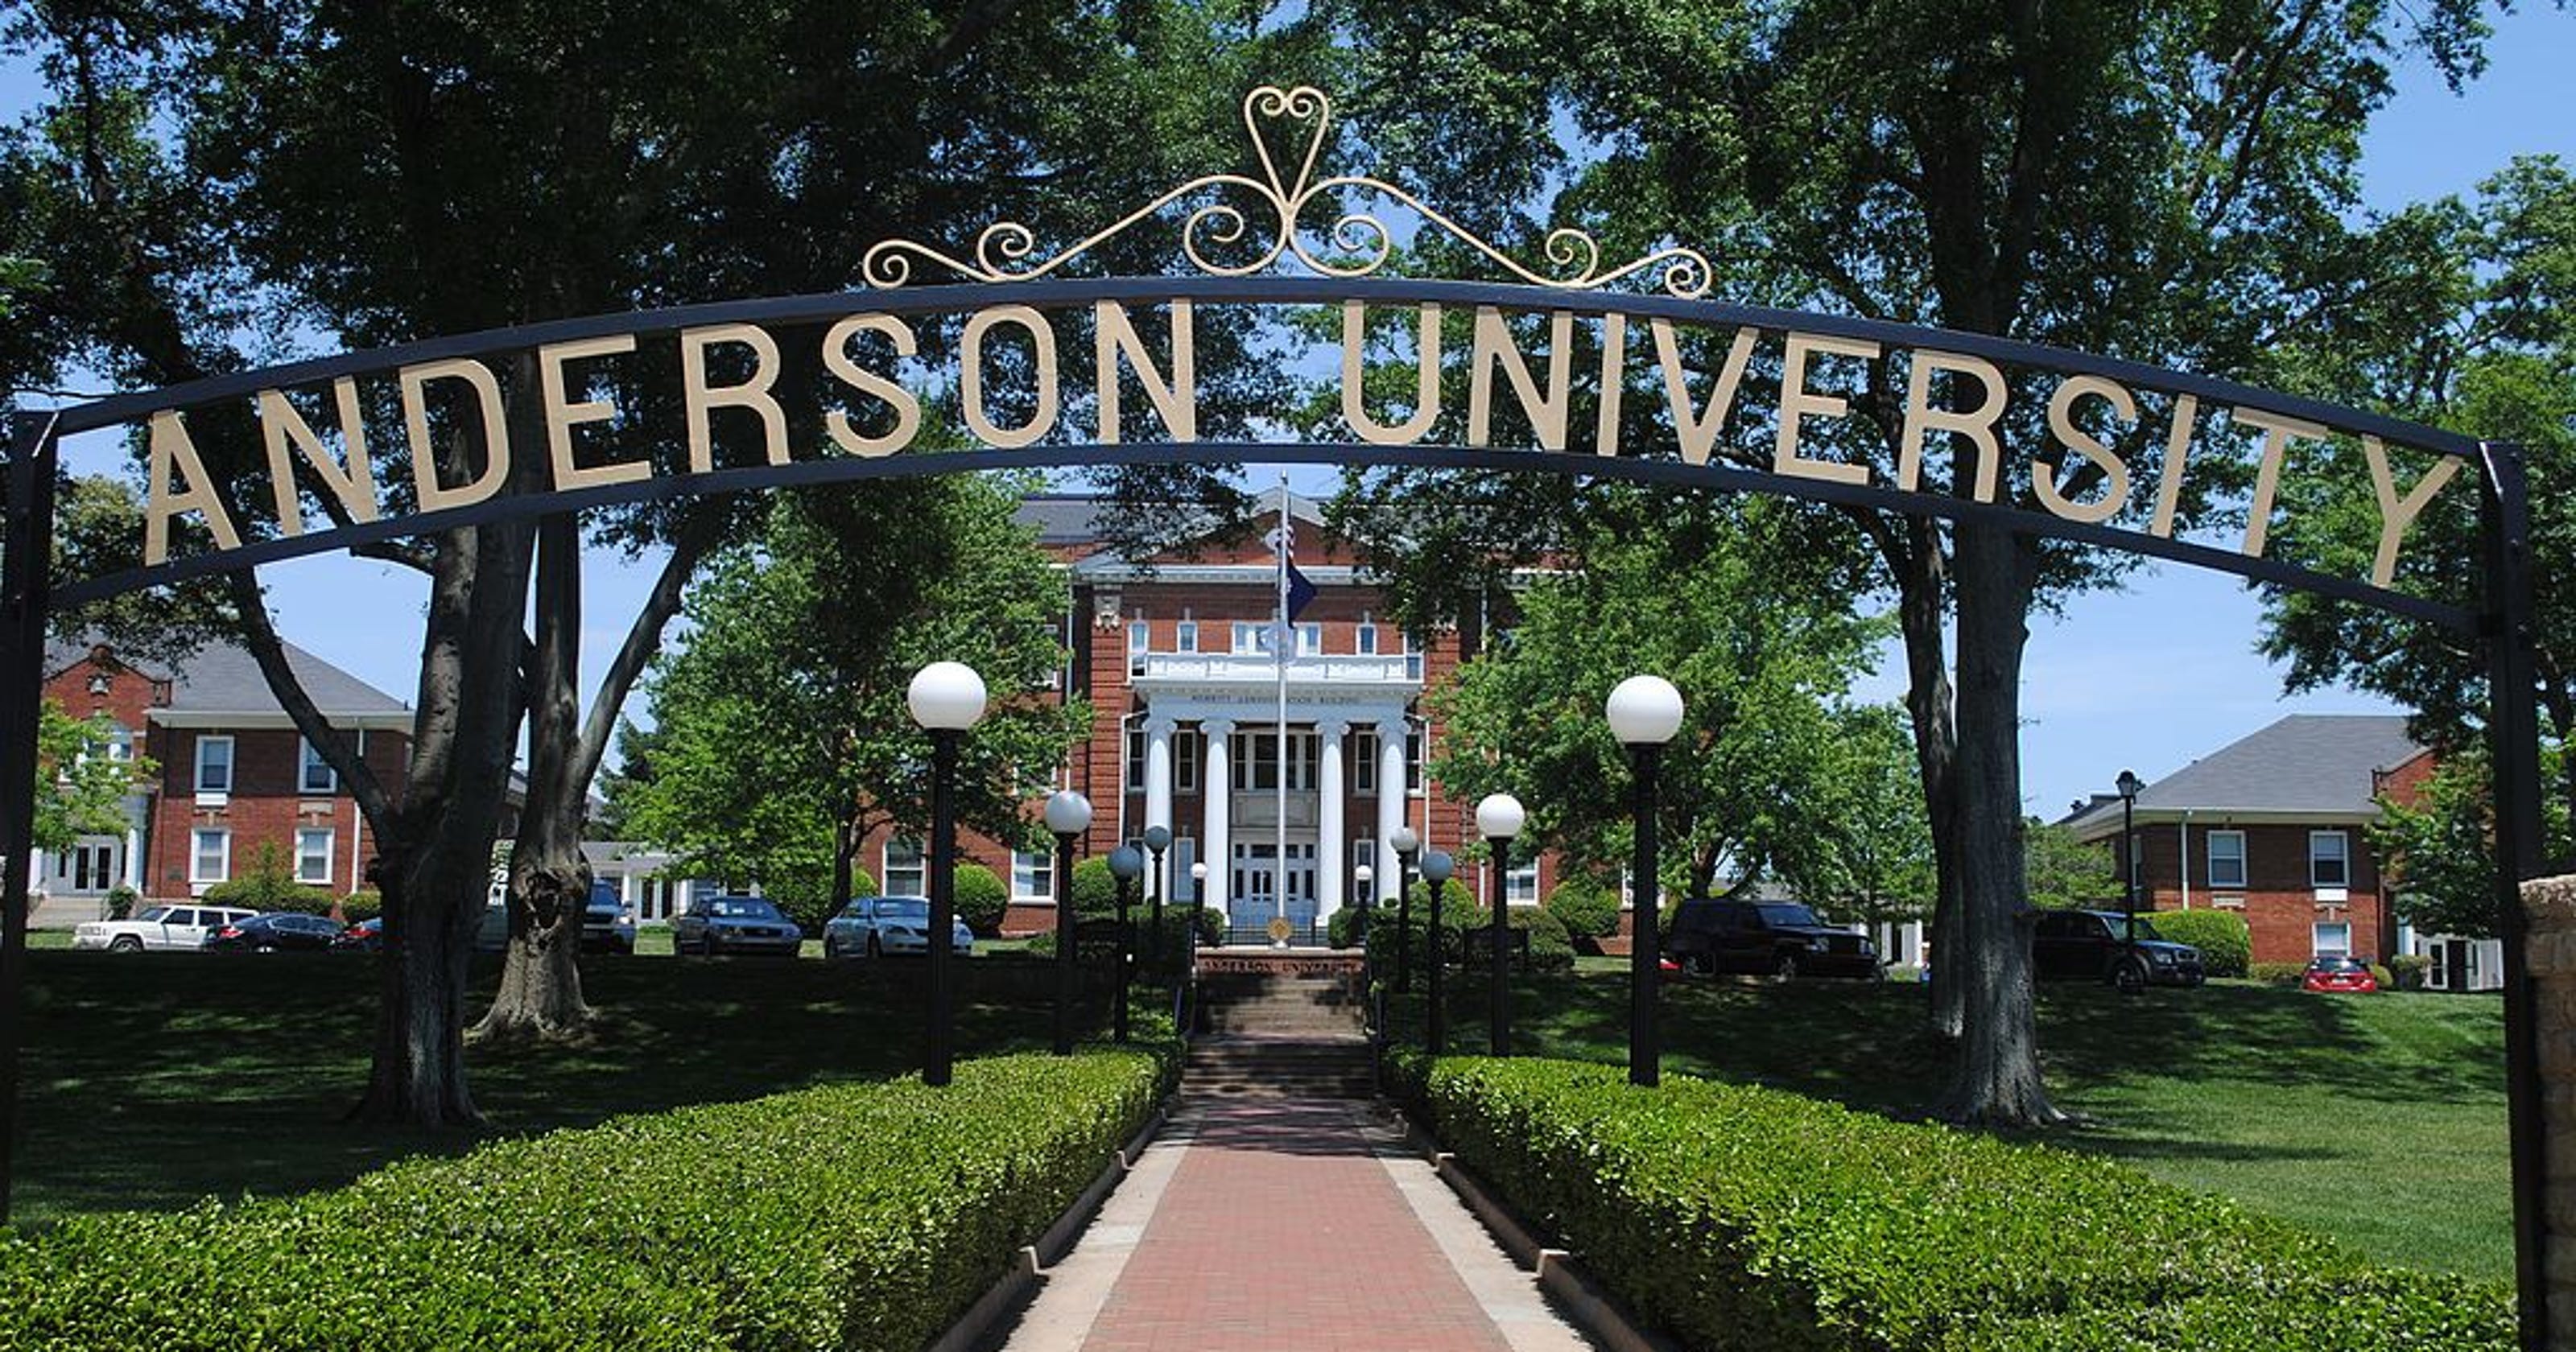 Anderson University receives 1 million to fund 3550 scholarships